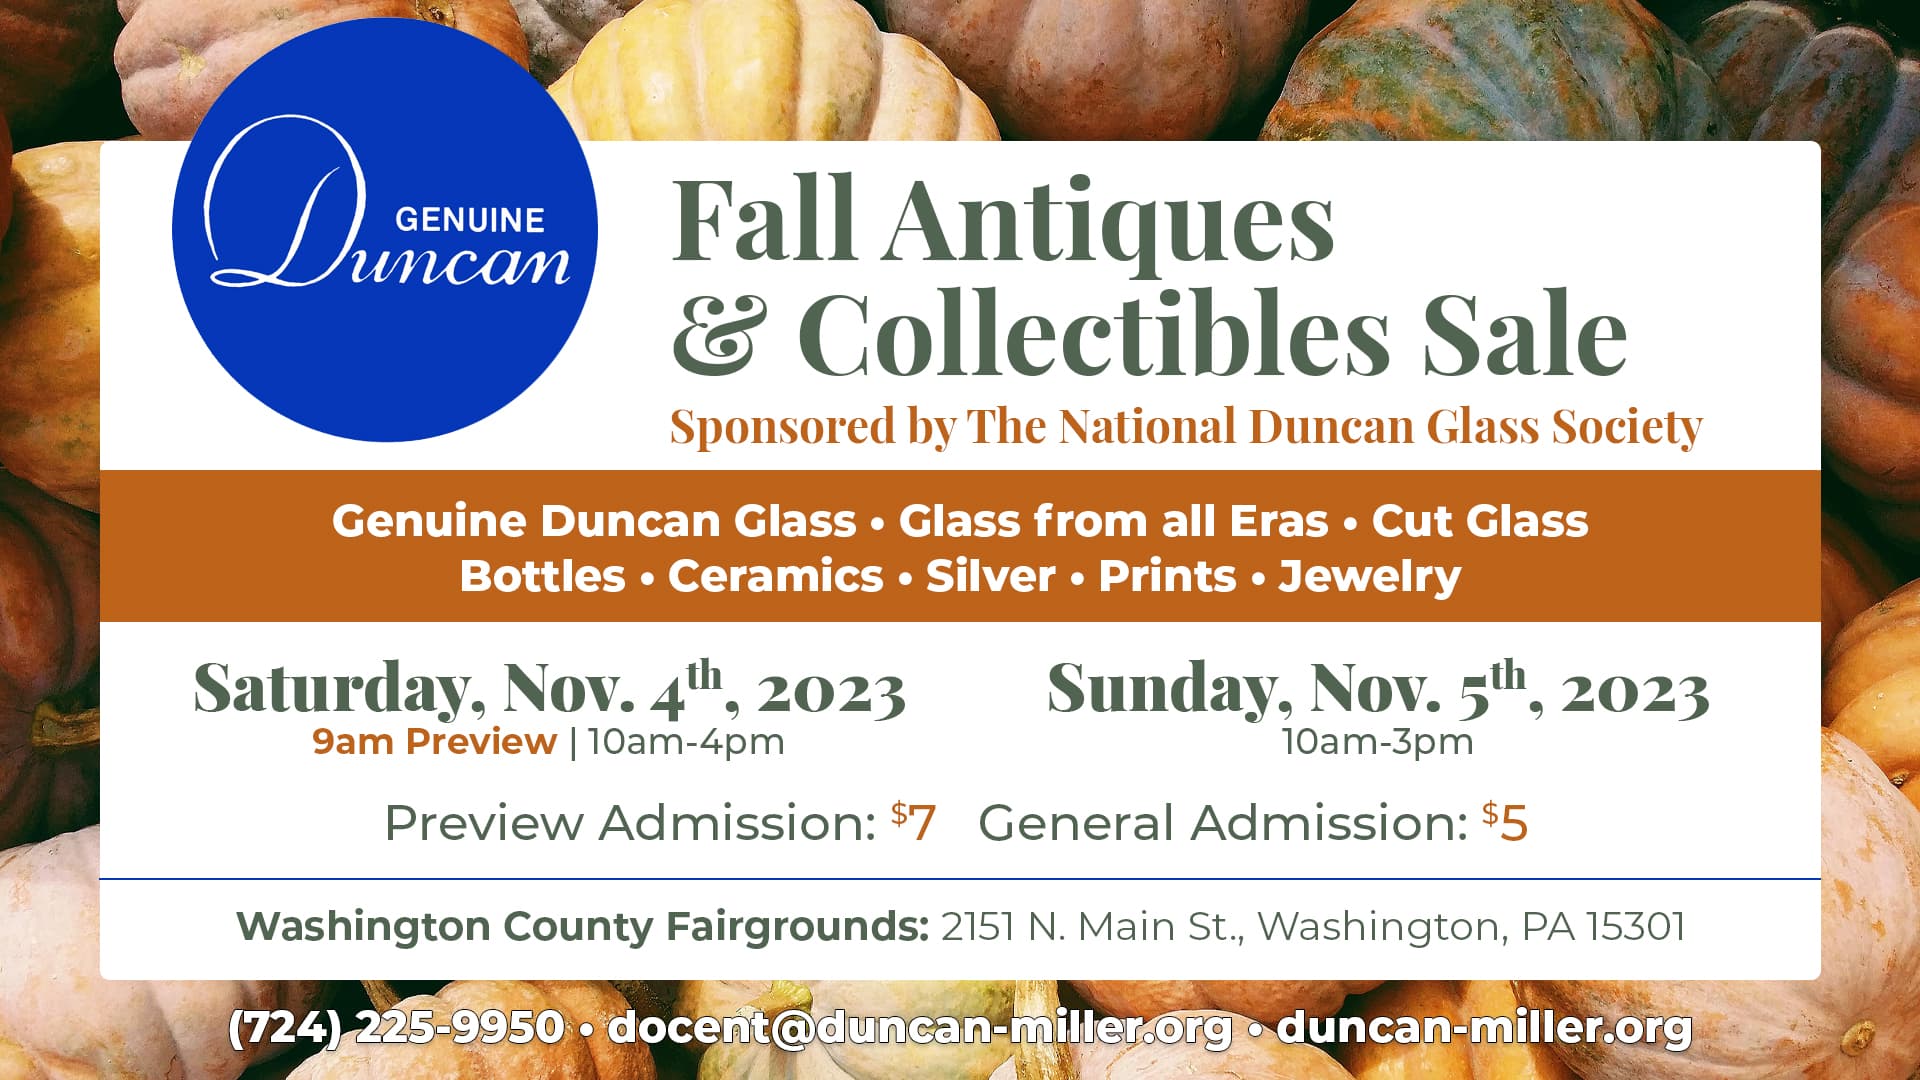 48th annual antiques and collectibles sale sponsored by The National Ducan Glass Society July 8th-9th, 2023.